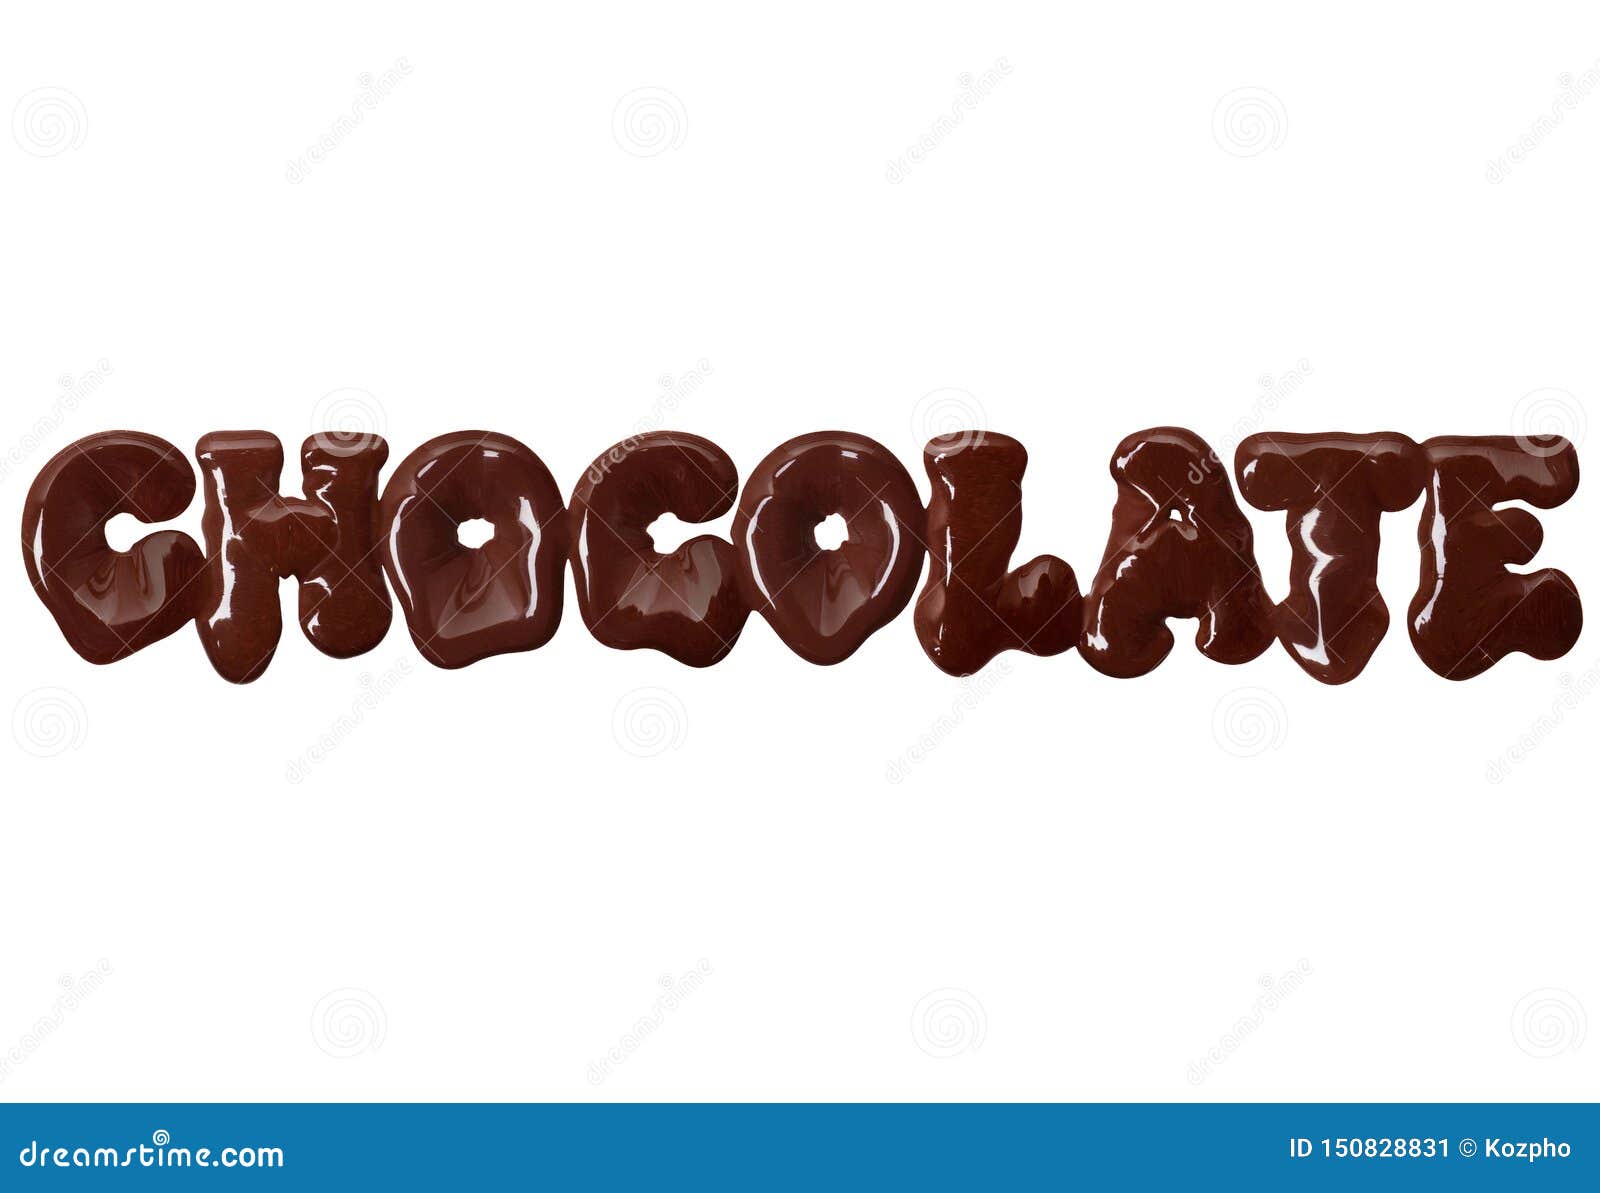 The Word Chocolate Written With Liquid Chocolate Isolated On White 